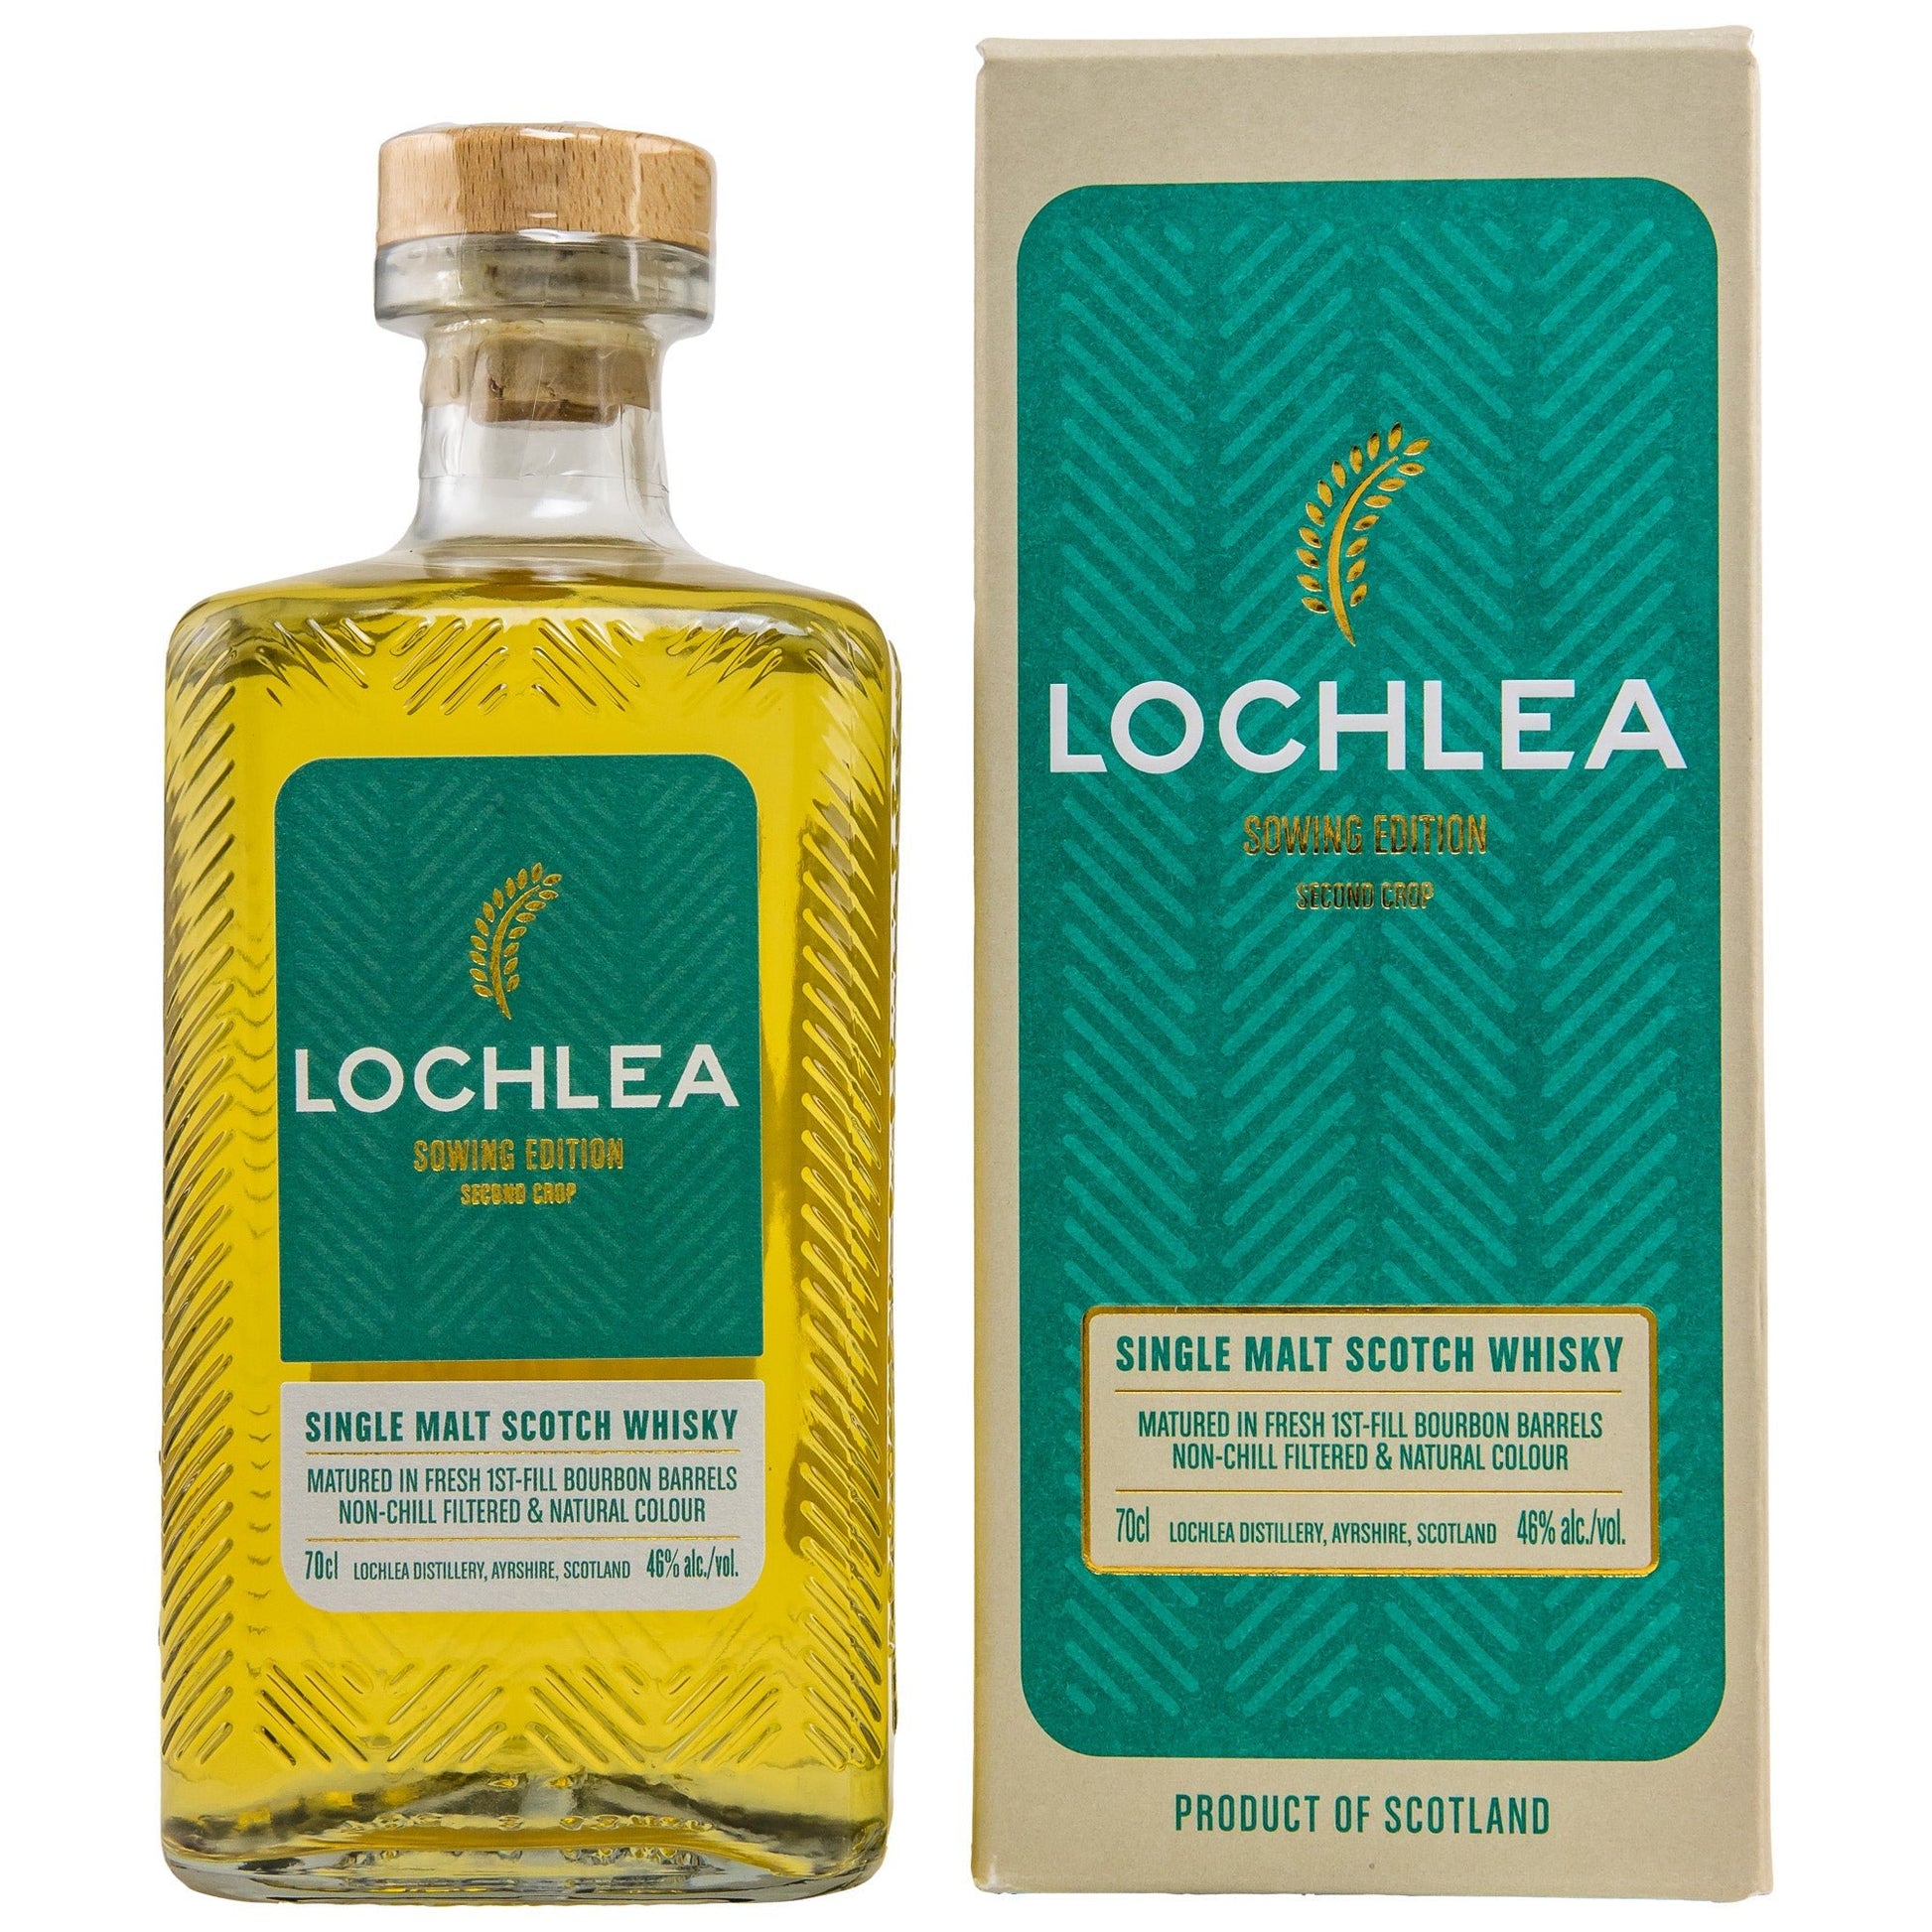 Lochlea | Sowing Edition | Second Crop | 46%GET A BOTTLE